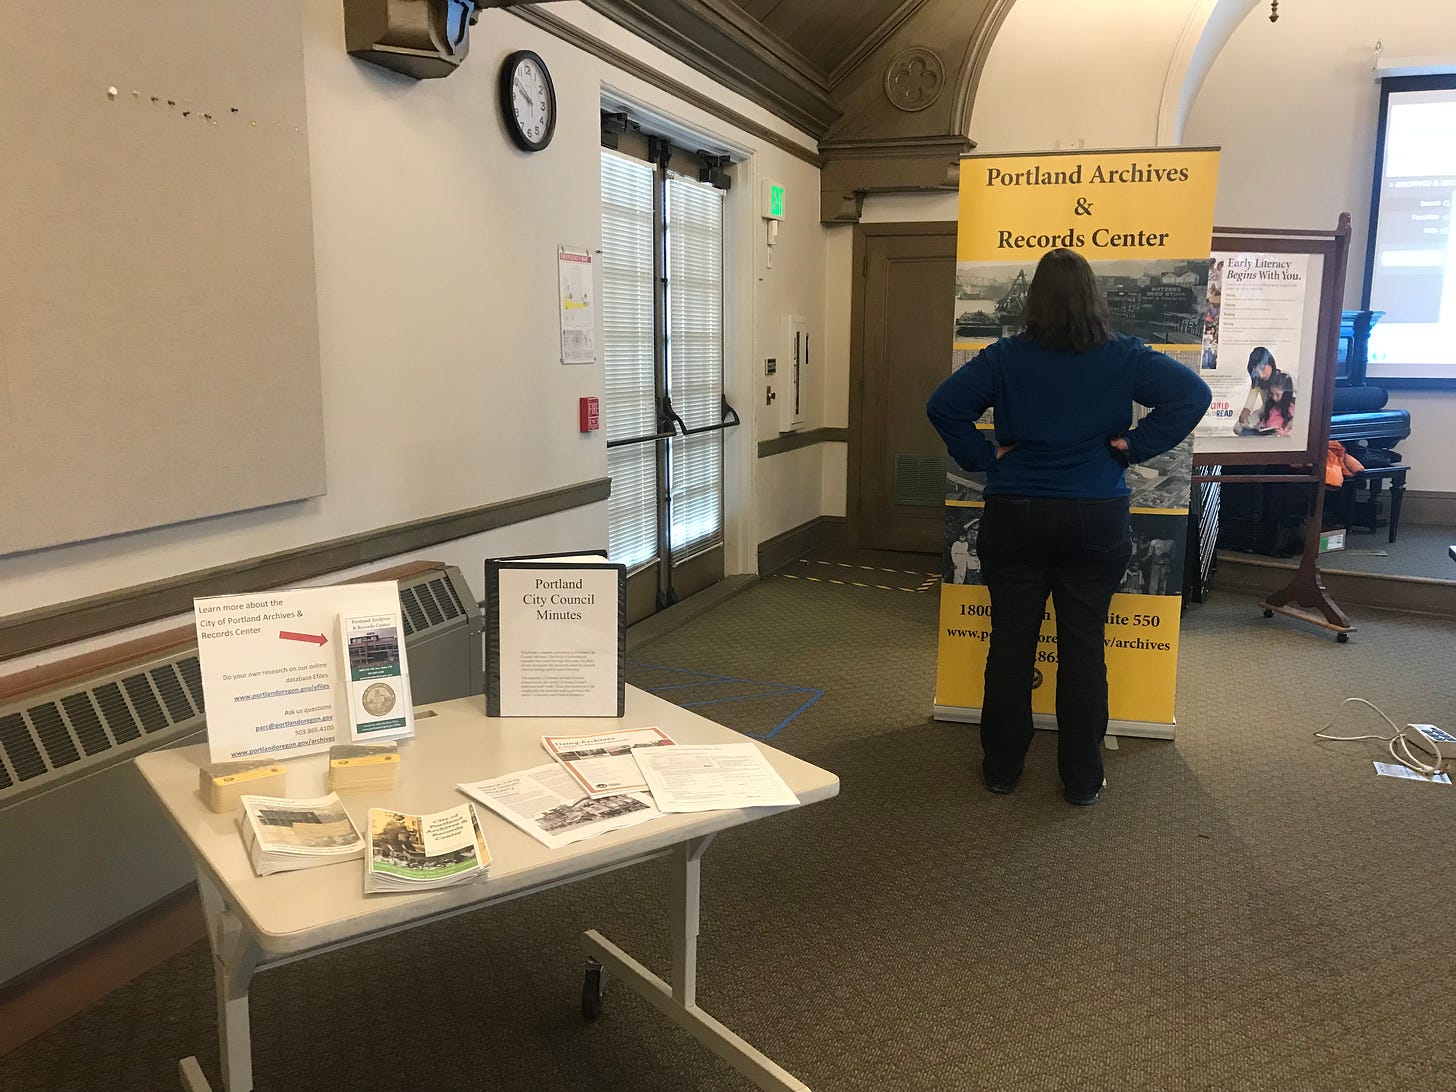 Brochures and handouts on a table and a person standing in front of a sign with 4 images